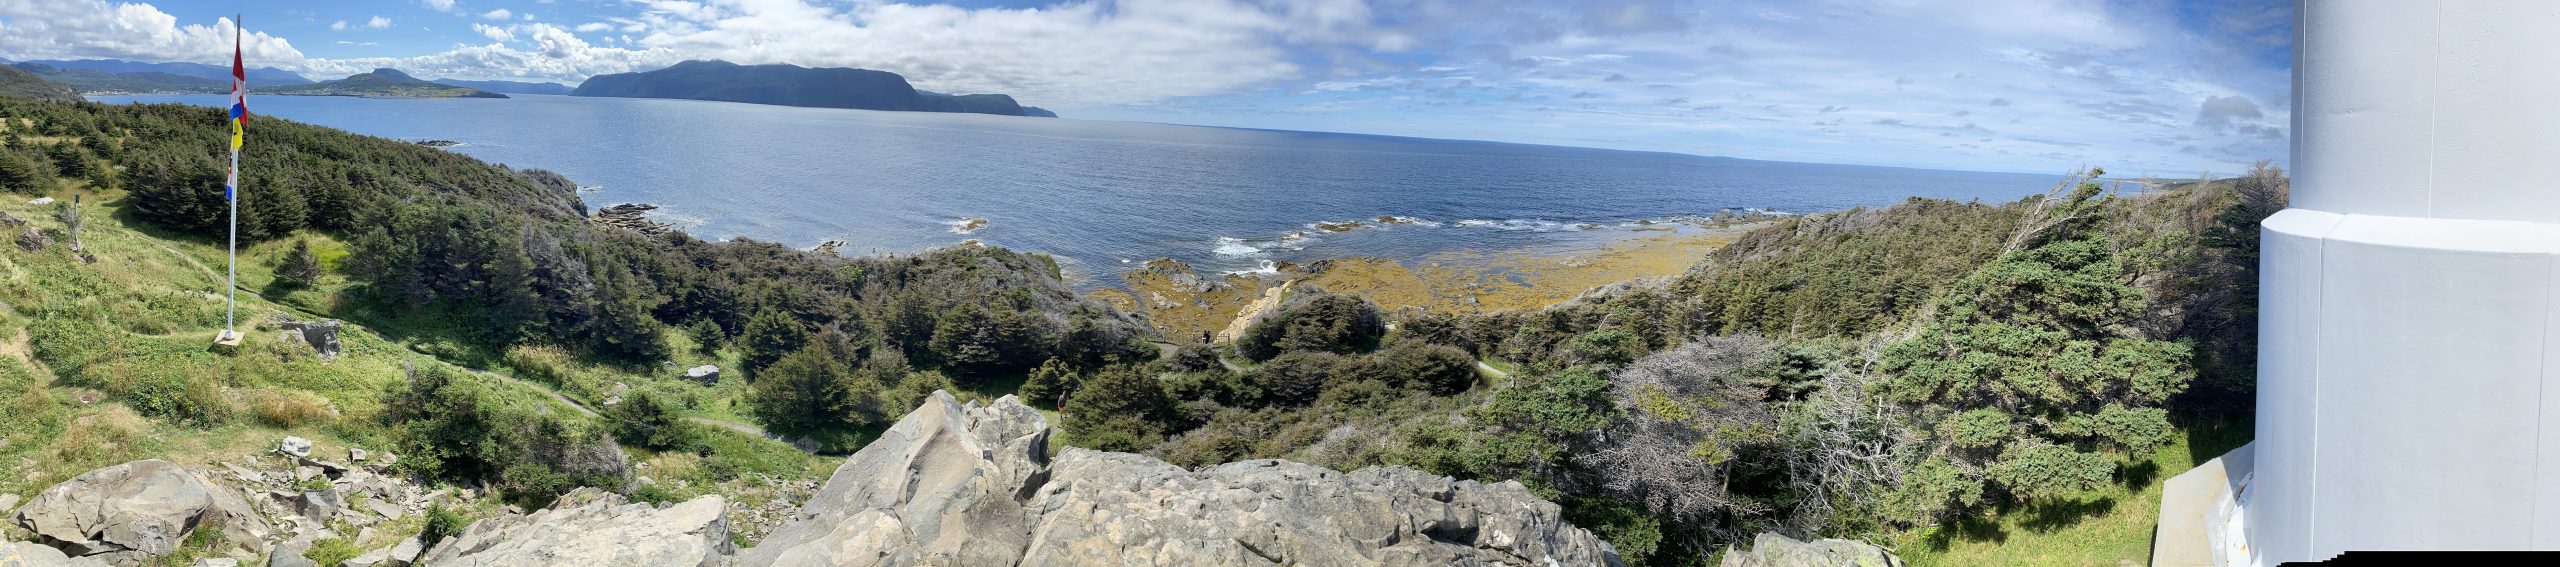 A panoramic view of Bonne Bay from Rocky Harbour on the left to the Lobster Cove lighthouse on the right, in Newfoundland.